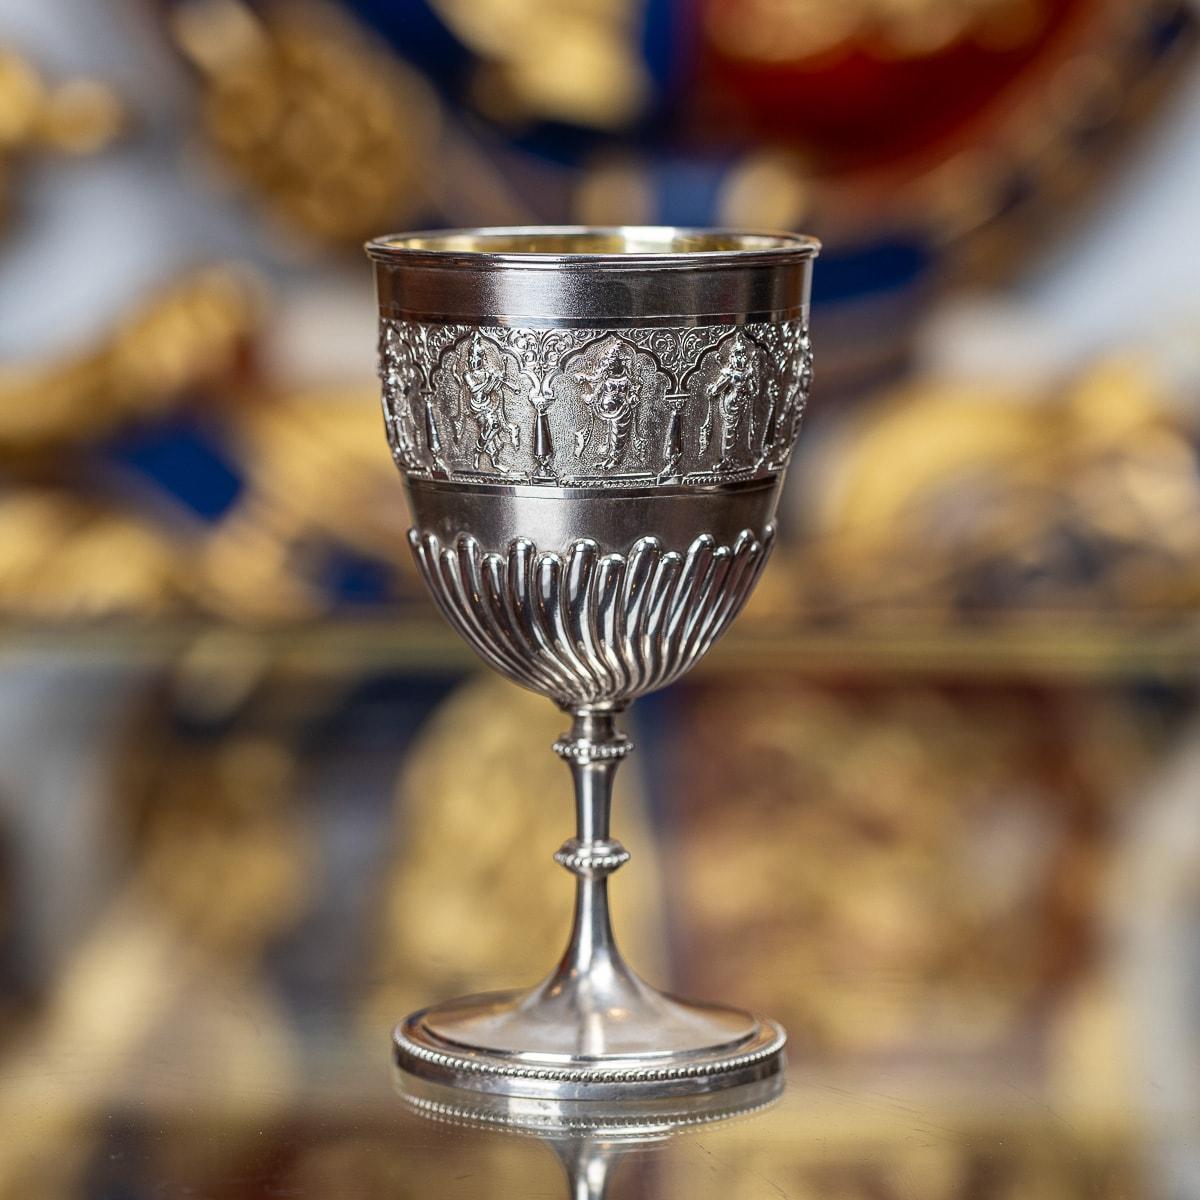 Antique late-19th Century Indian Colonial solid silver repousse goblet, the top band is beautifully chased and repousse' decorated depicting Hindu gods and goddesses in elaborate cartooches, applied with beaded boarders and flutted decoration.